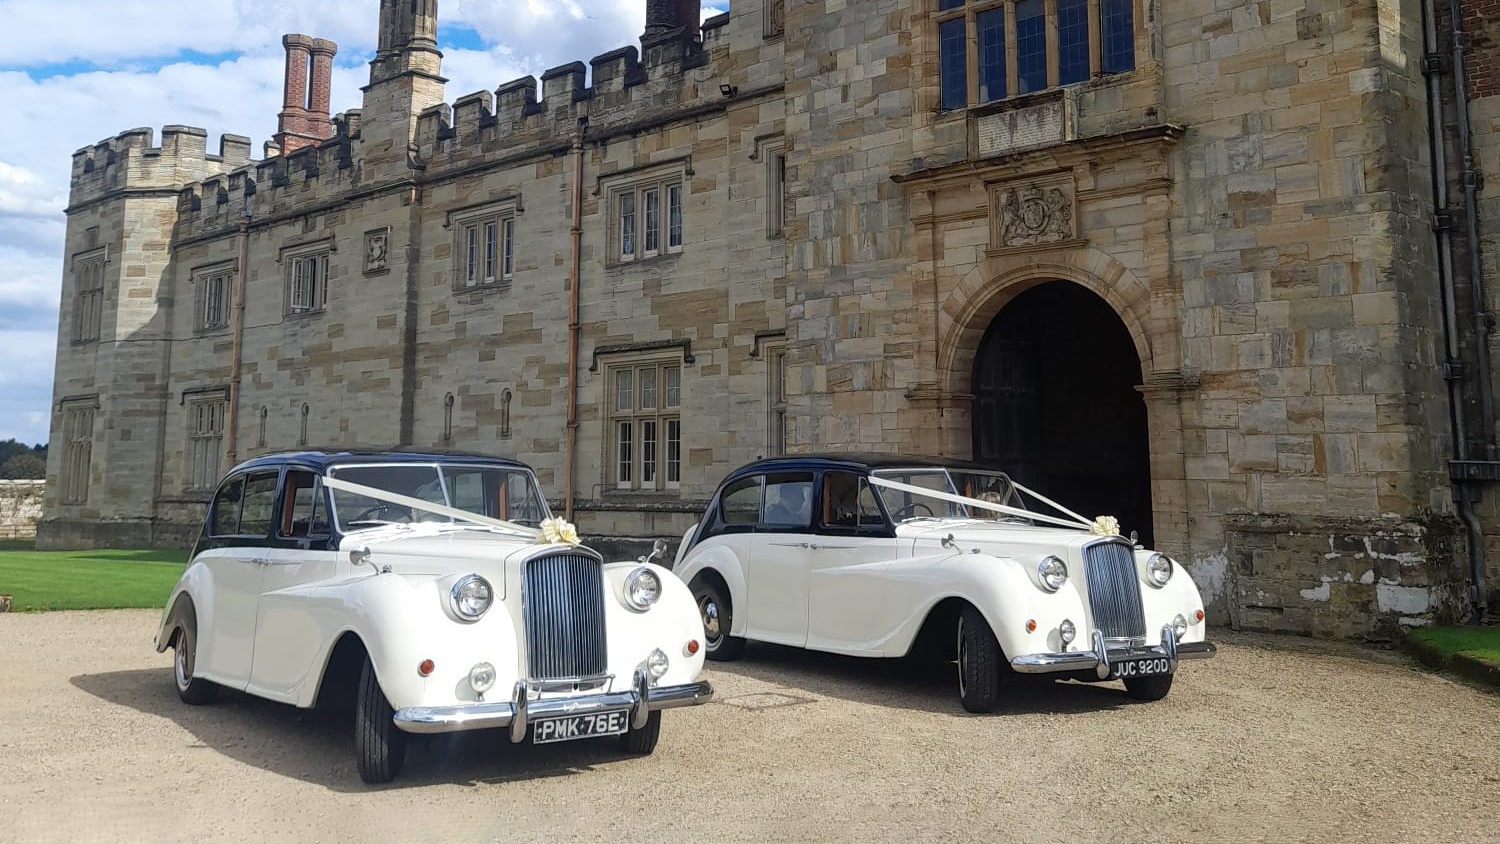 Two Classic Austin Princess Limousine decorated with Ivory Ribbons and Bows on top of the front grill. Vehicles are parked in front of a large manor house in Ashford